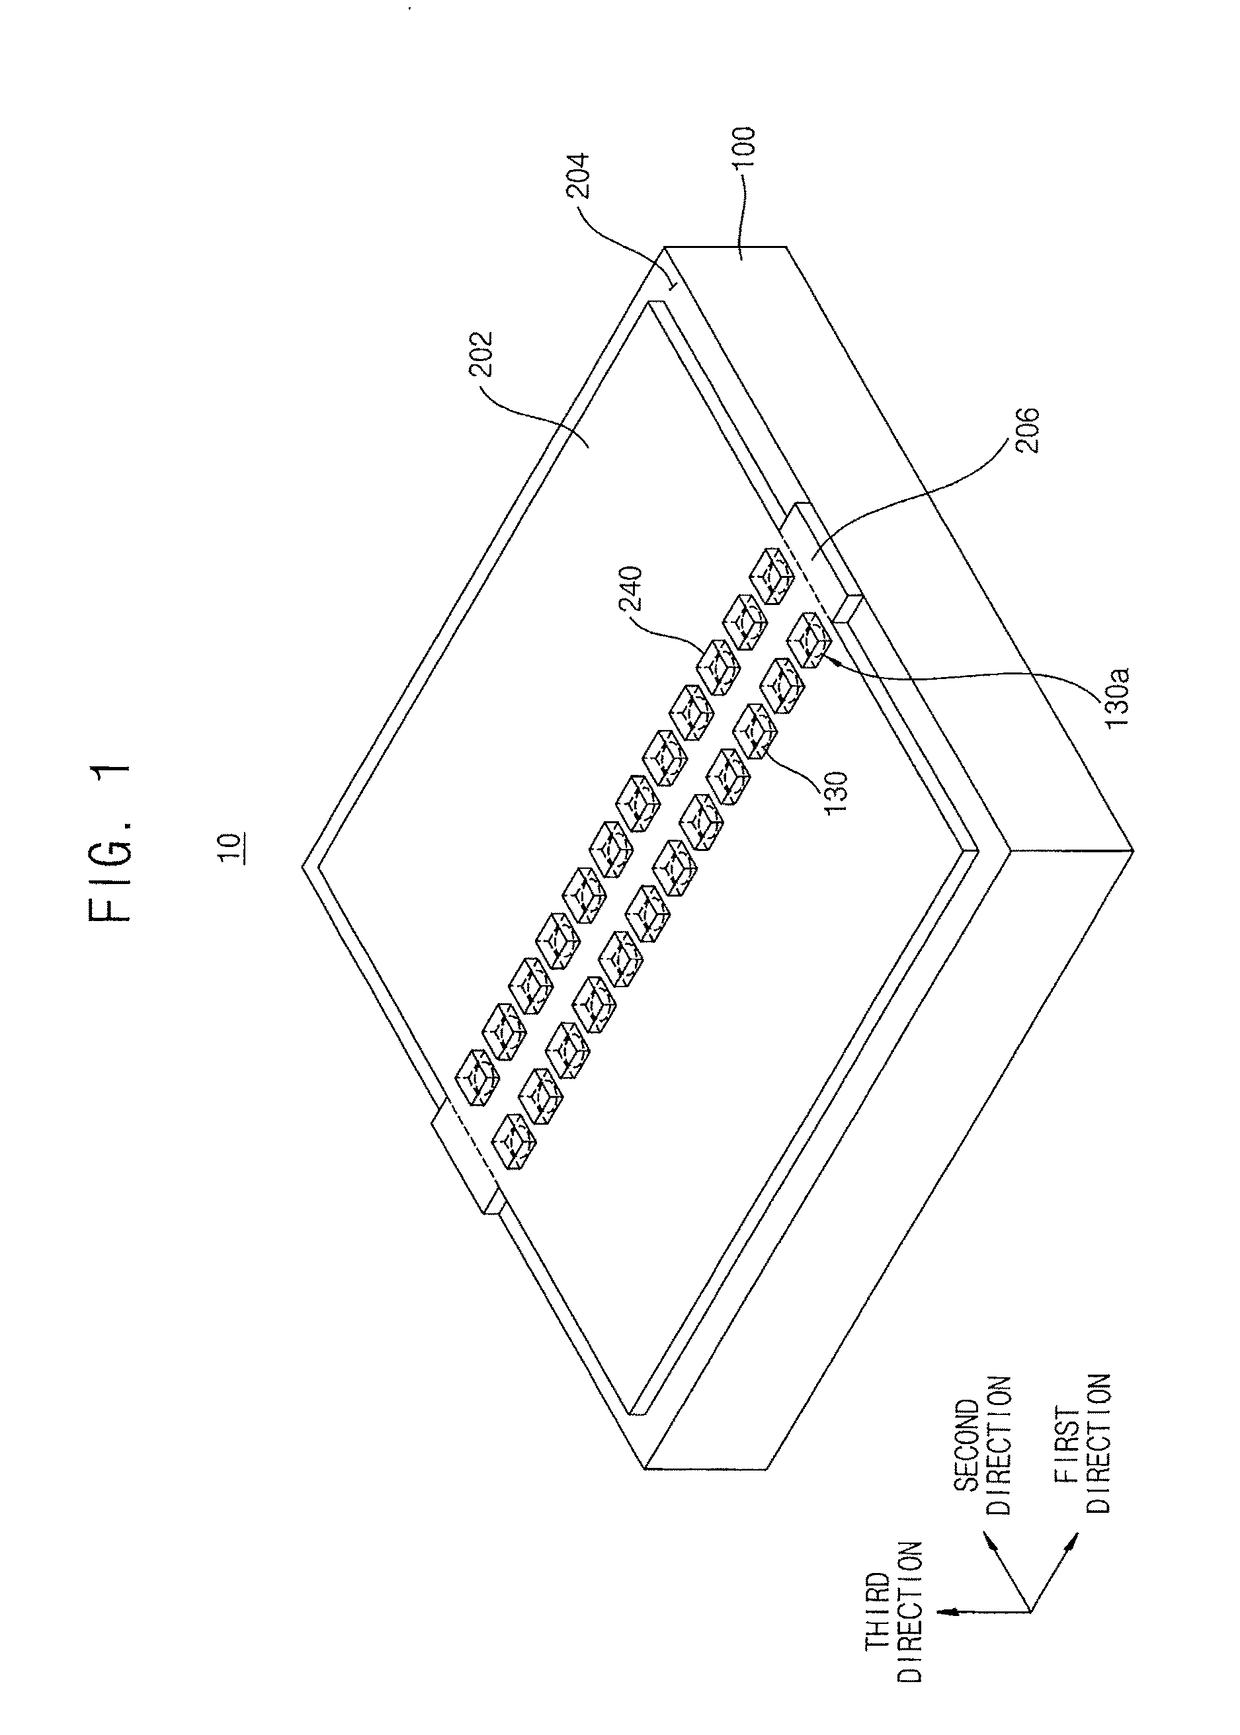 Semiconductor devices and methods of manufacturing the same, and semiconductor packages including the semiconductor devices